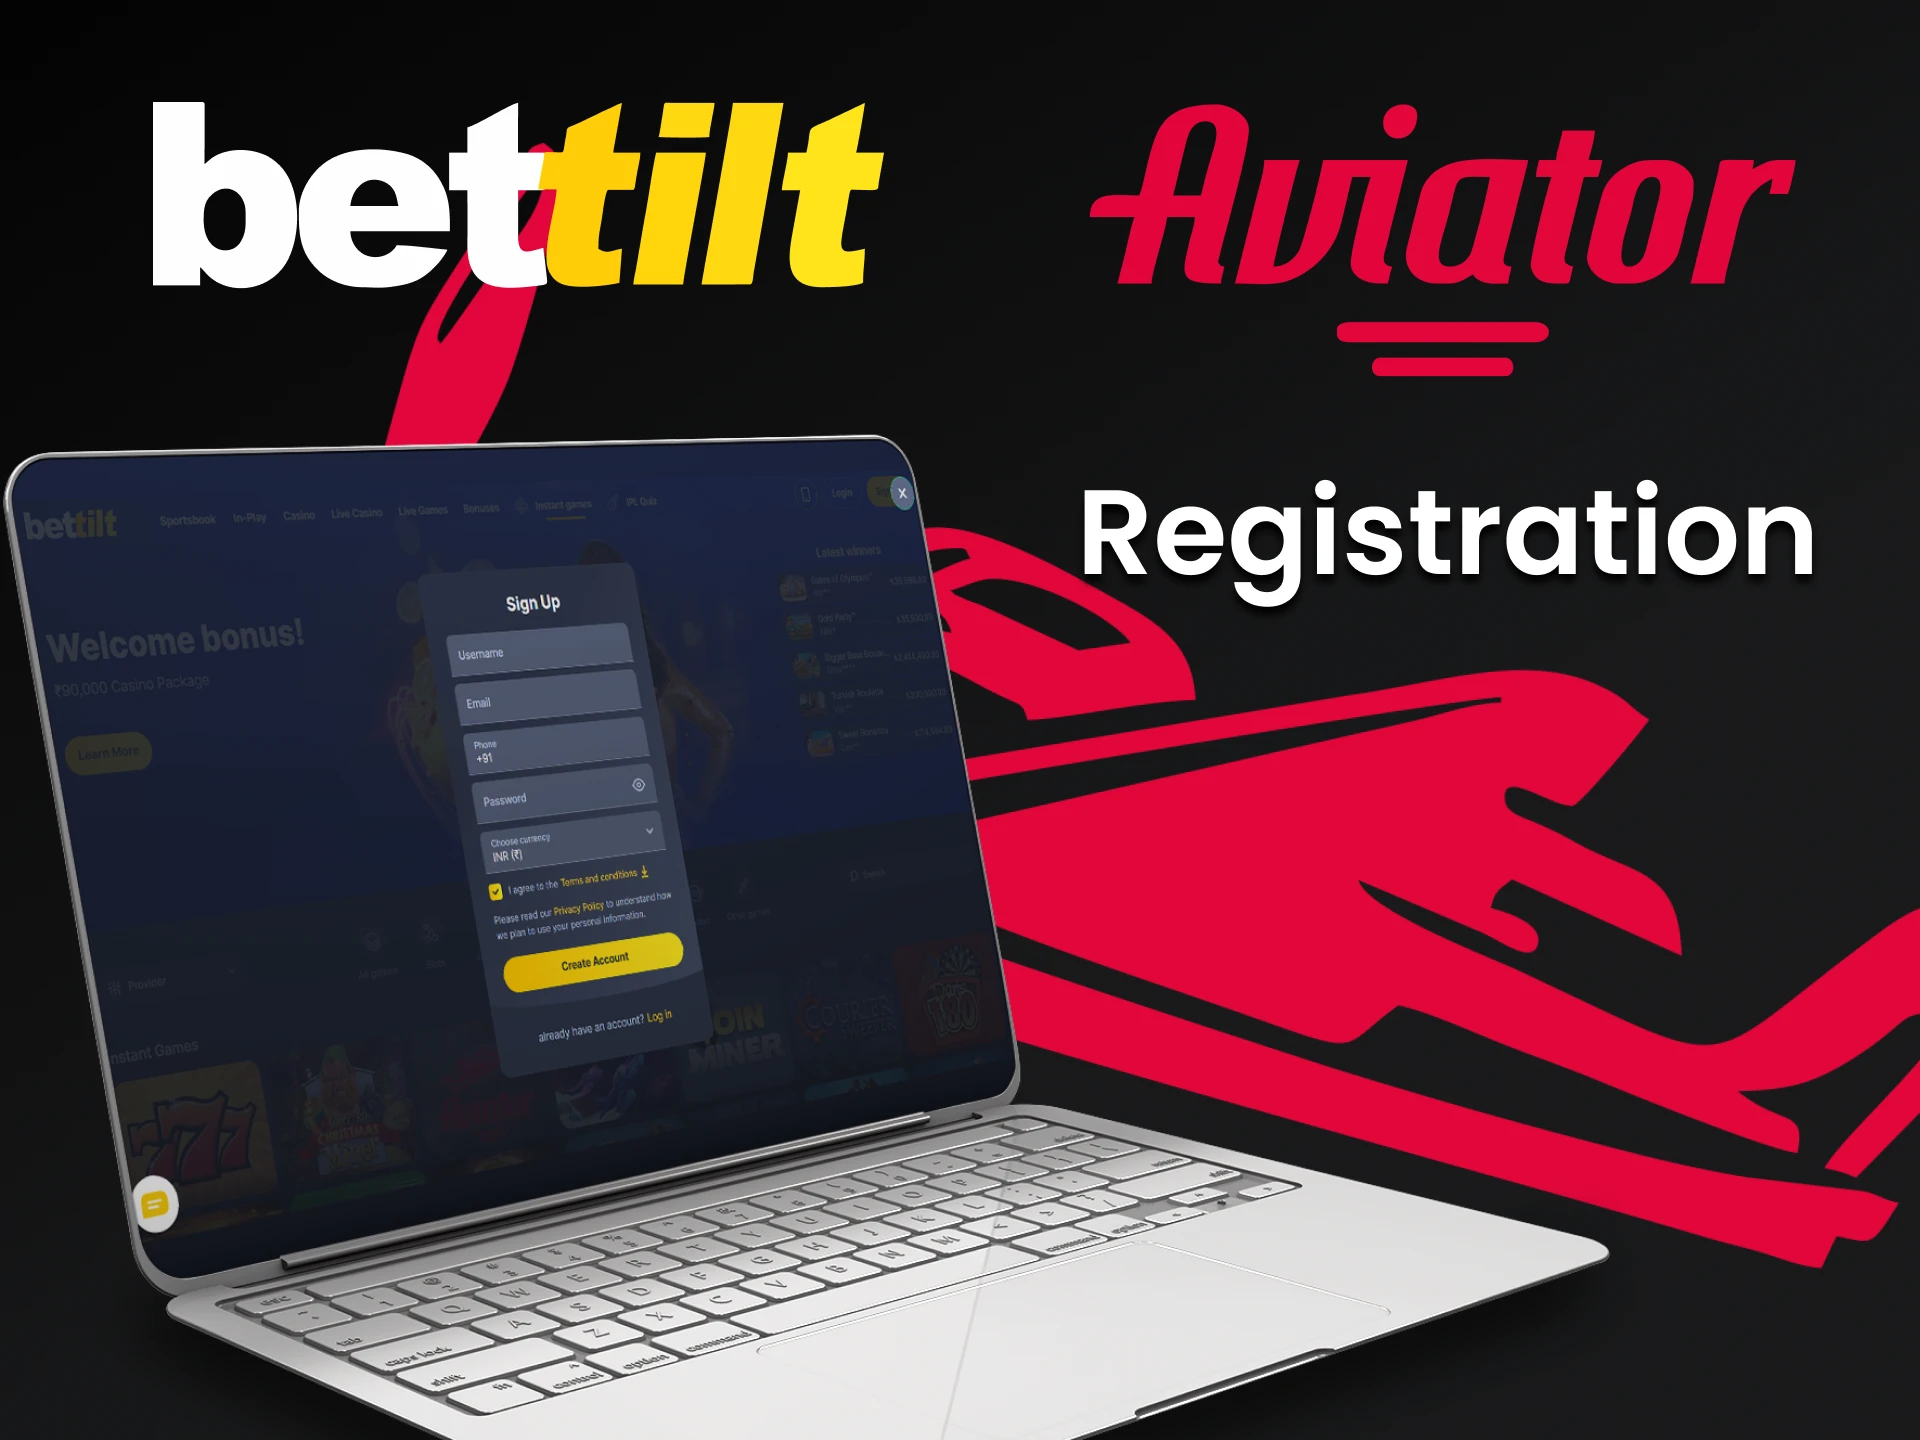 Go through the registration process on Bettilt to play Aviator.